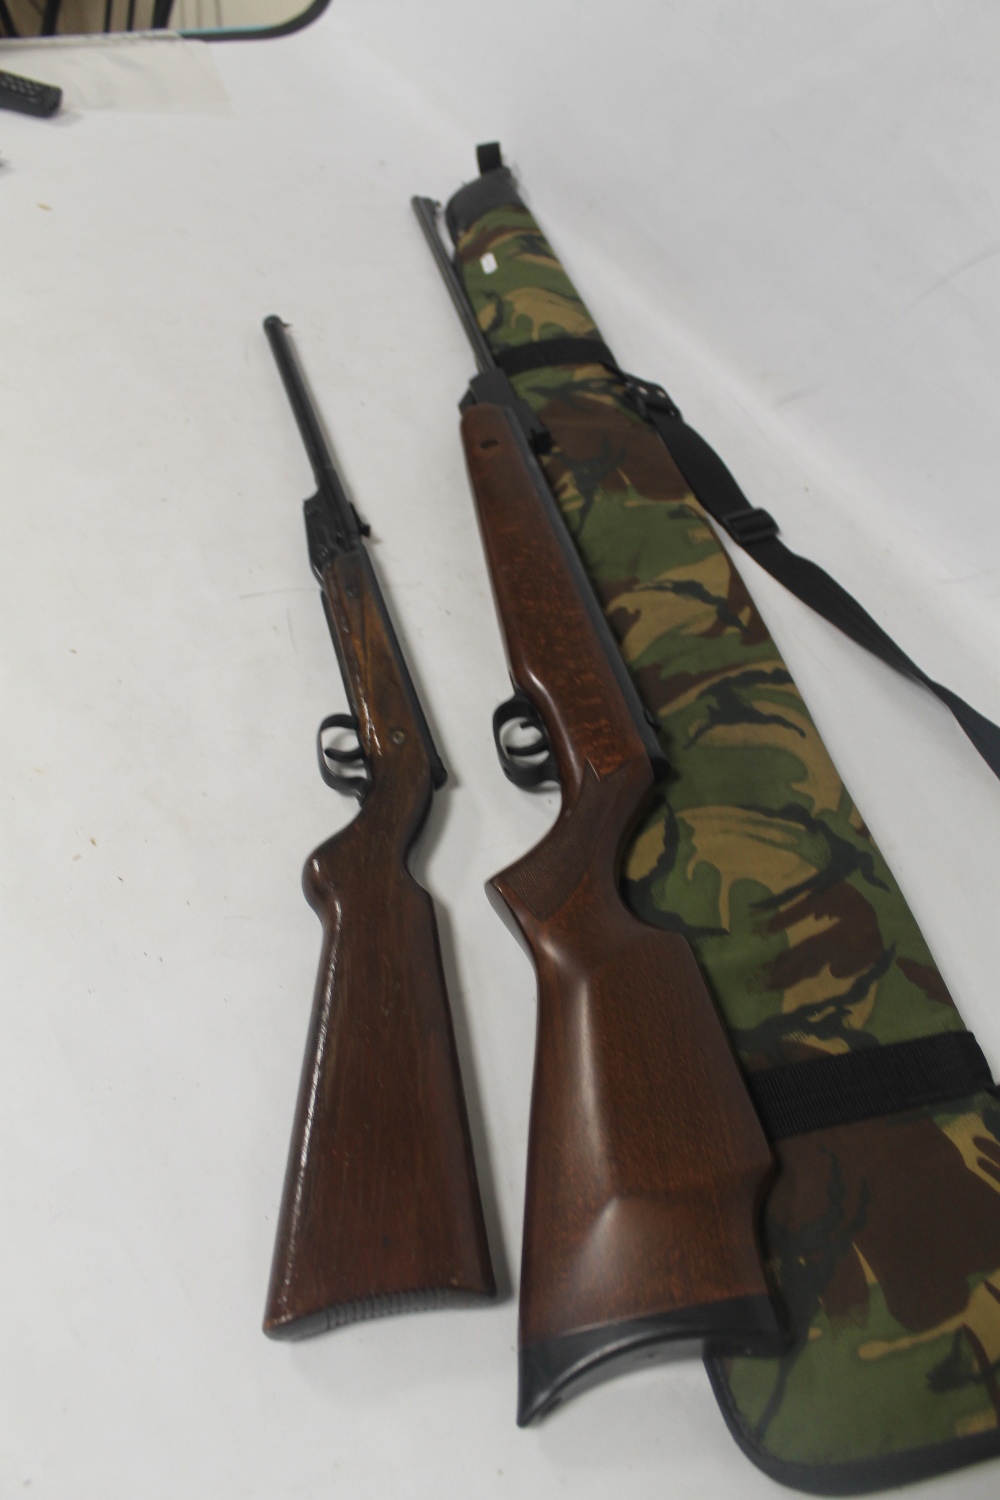 A NORICA WEST AIR RIFLE IN CAMOUFLAGE CARRY CASE, together with an original MOD air rifle